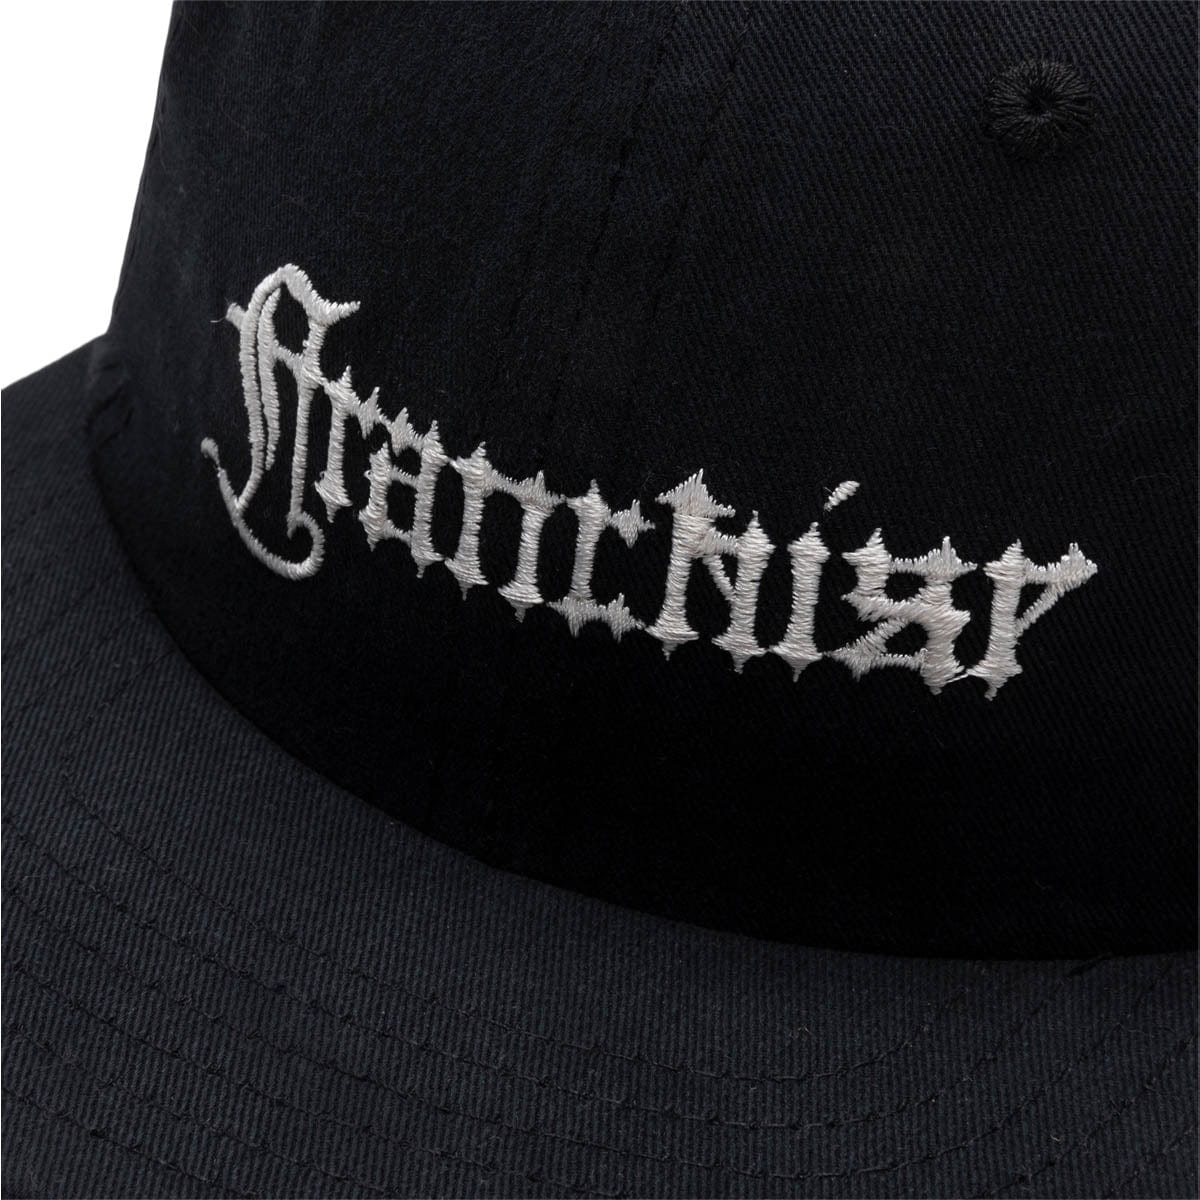 Franchise Accessories - HATS - Snapback-Fitted Hat BLACK / O/S BIOMETRICS COTTON TWILL 6 PANEL CAP